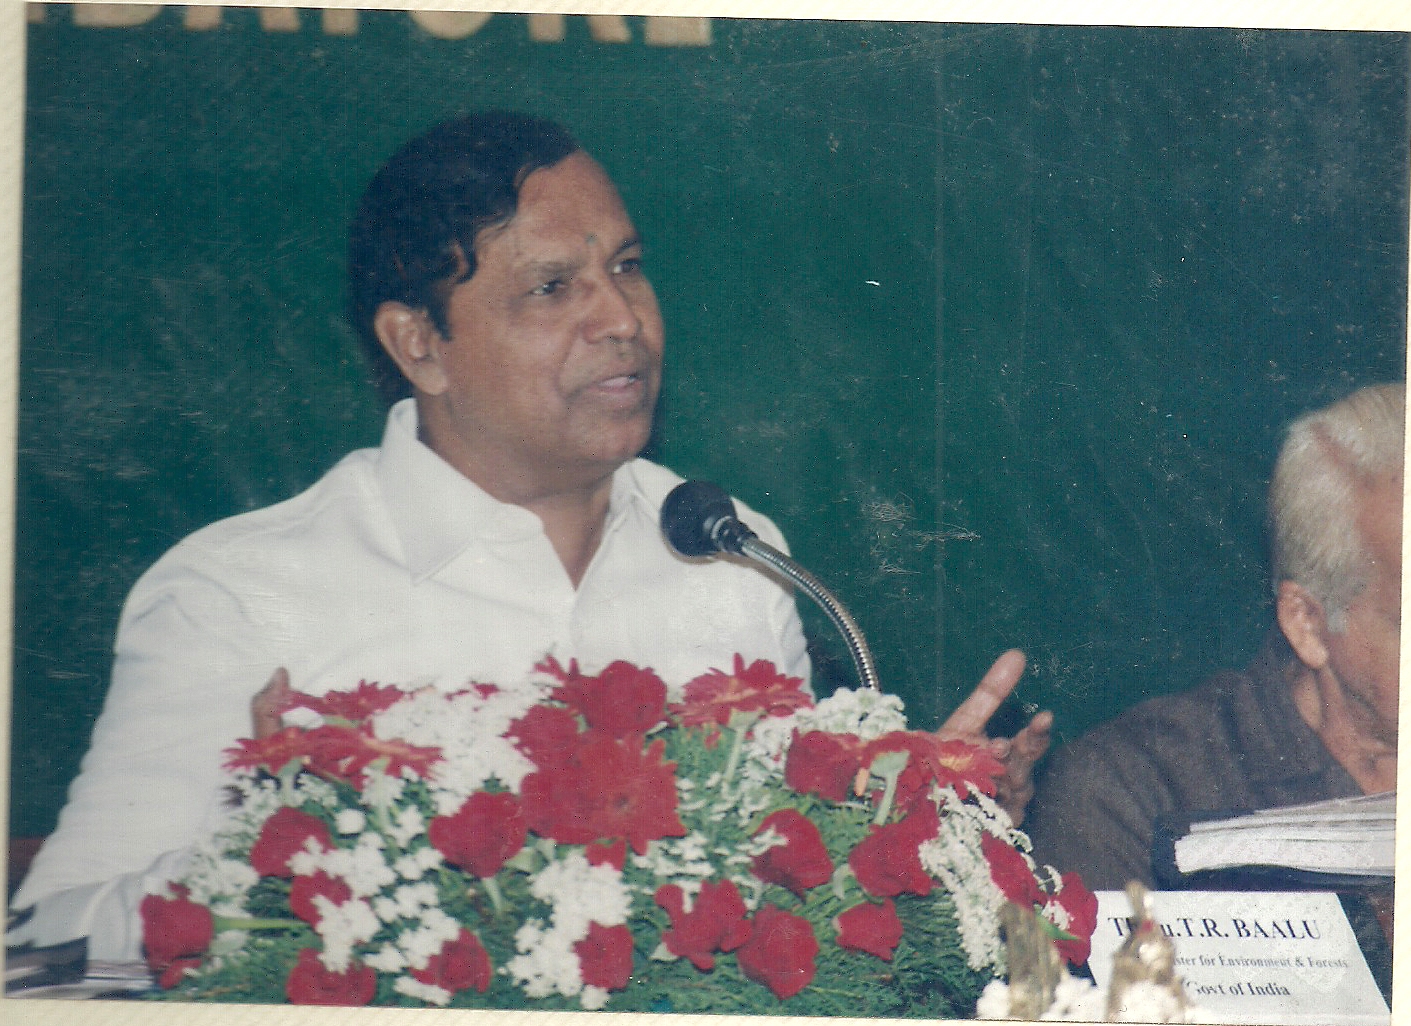 Addressing Env. Ministers Conference at Coimbtore - Jan 2001